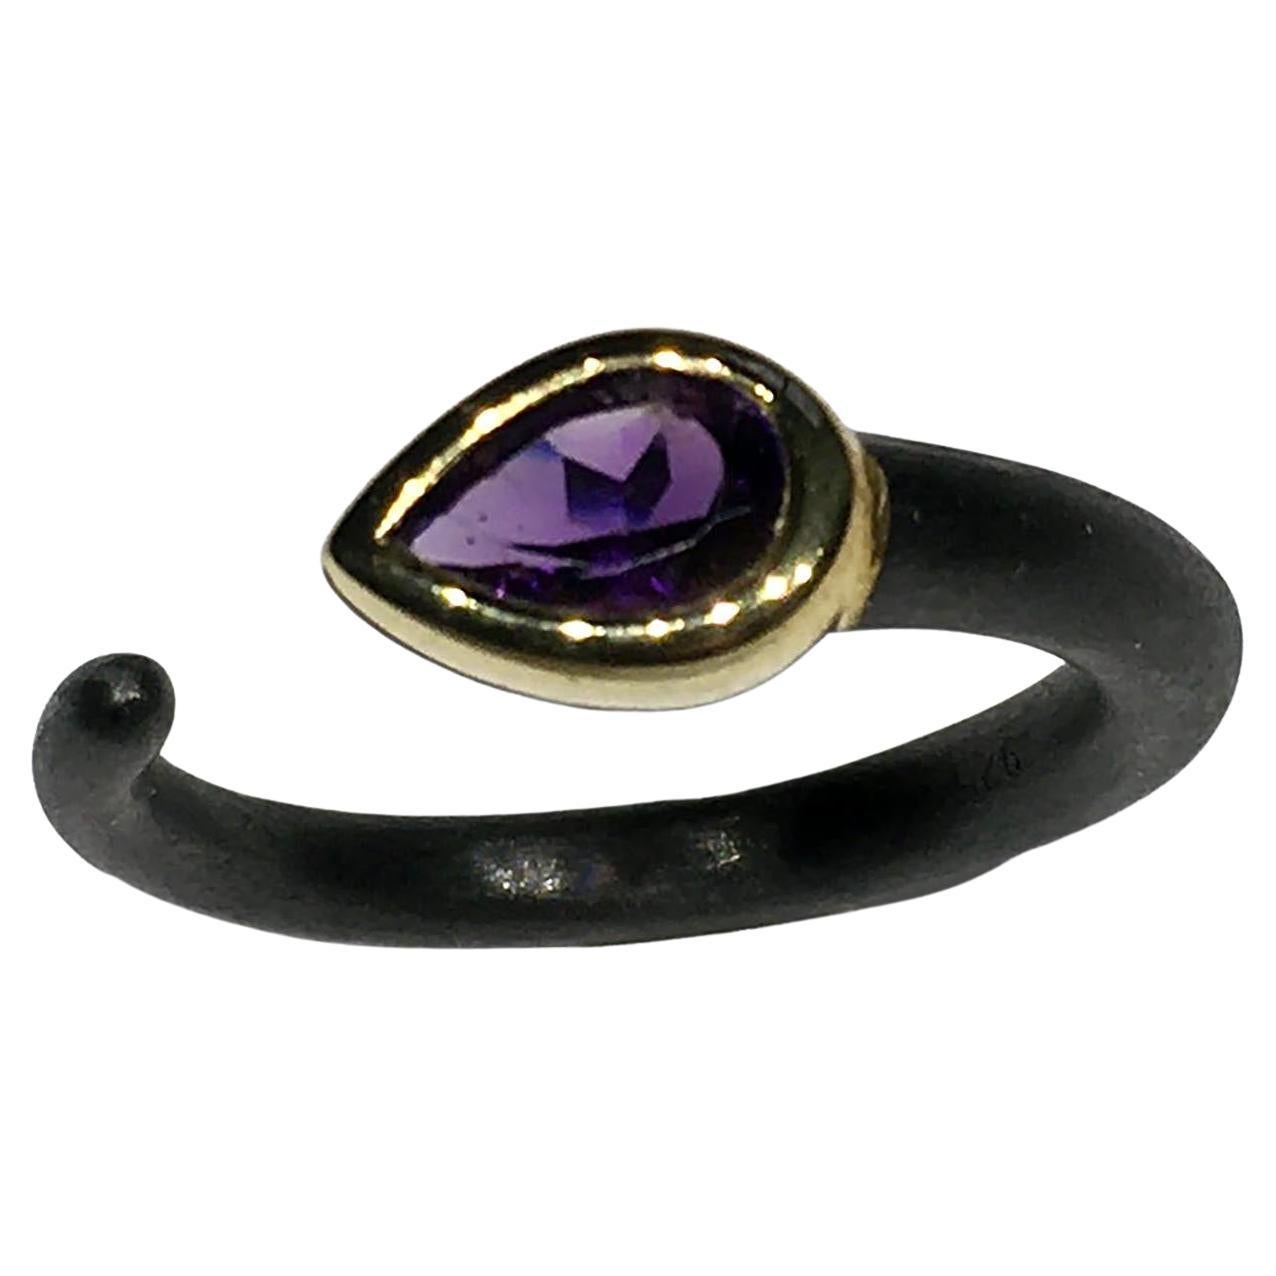 An Amethyst Ring Set in Gold Plated Bezel in a Blackened Silver Band